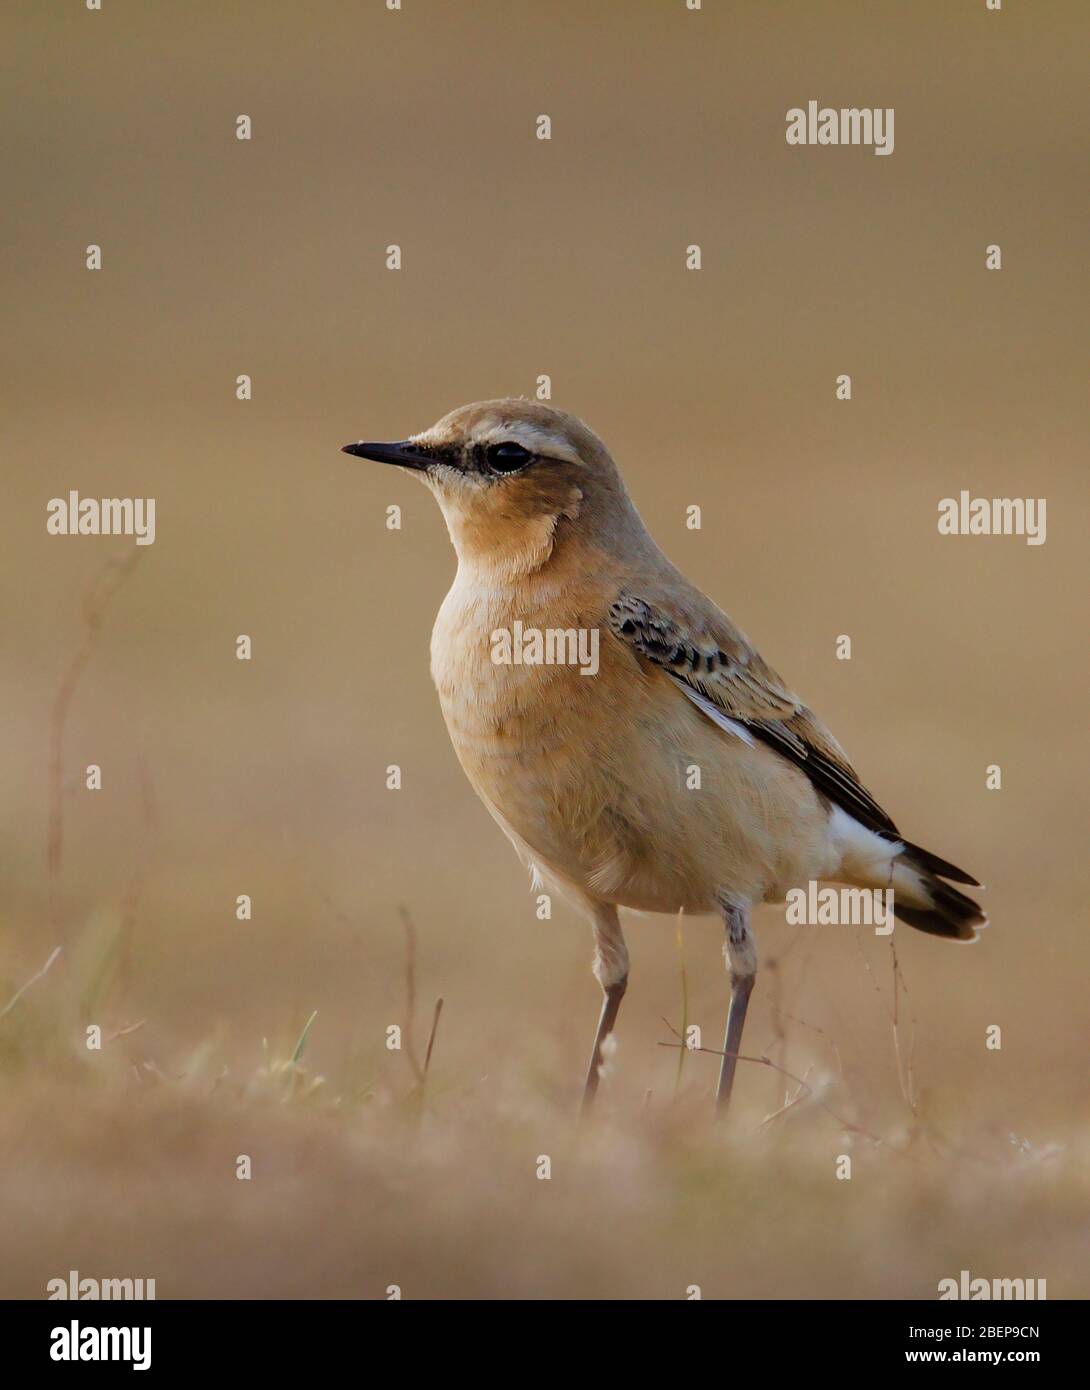 Profile Shot Of A Wheatear, Oenanthe oenanthe, Standing Upright On A Grassy Sand Dune Looking For Insects, Food. Taken at Stanpit Marsh UK Stock Photo